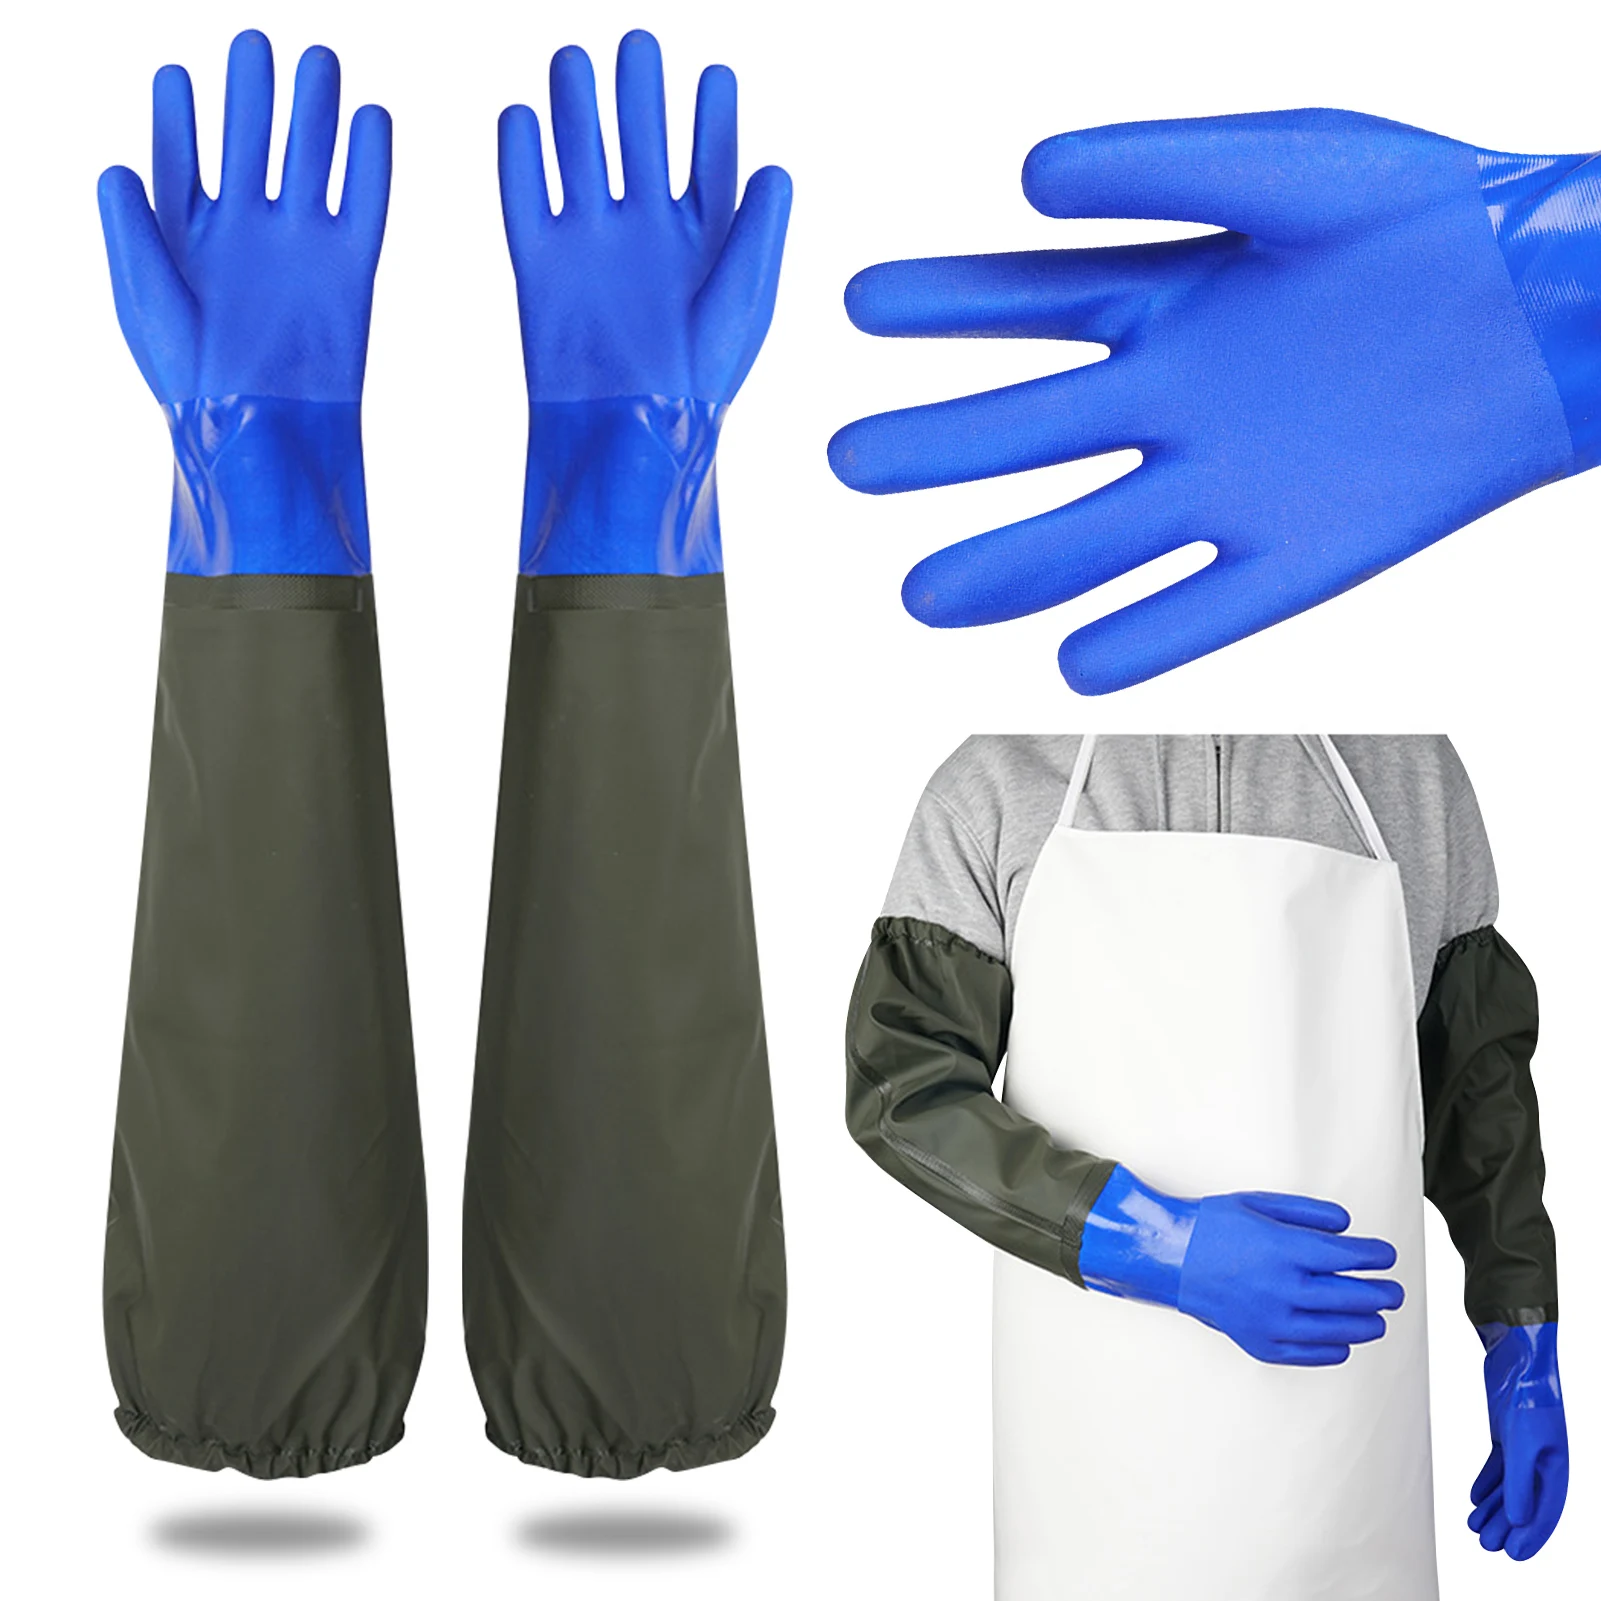 

Fishing Operation Protect Skin Heavy Duty Cleaning Waterproof Garden Durable Rubber Gloves Long Arm Cotton Lining Excellent Grip